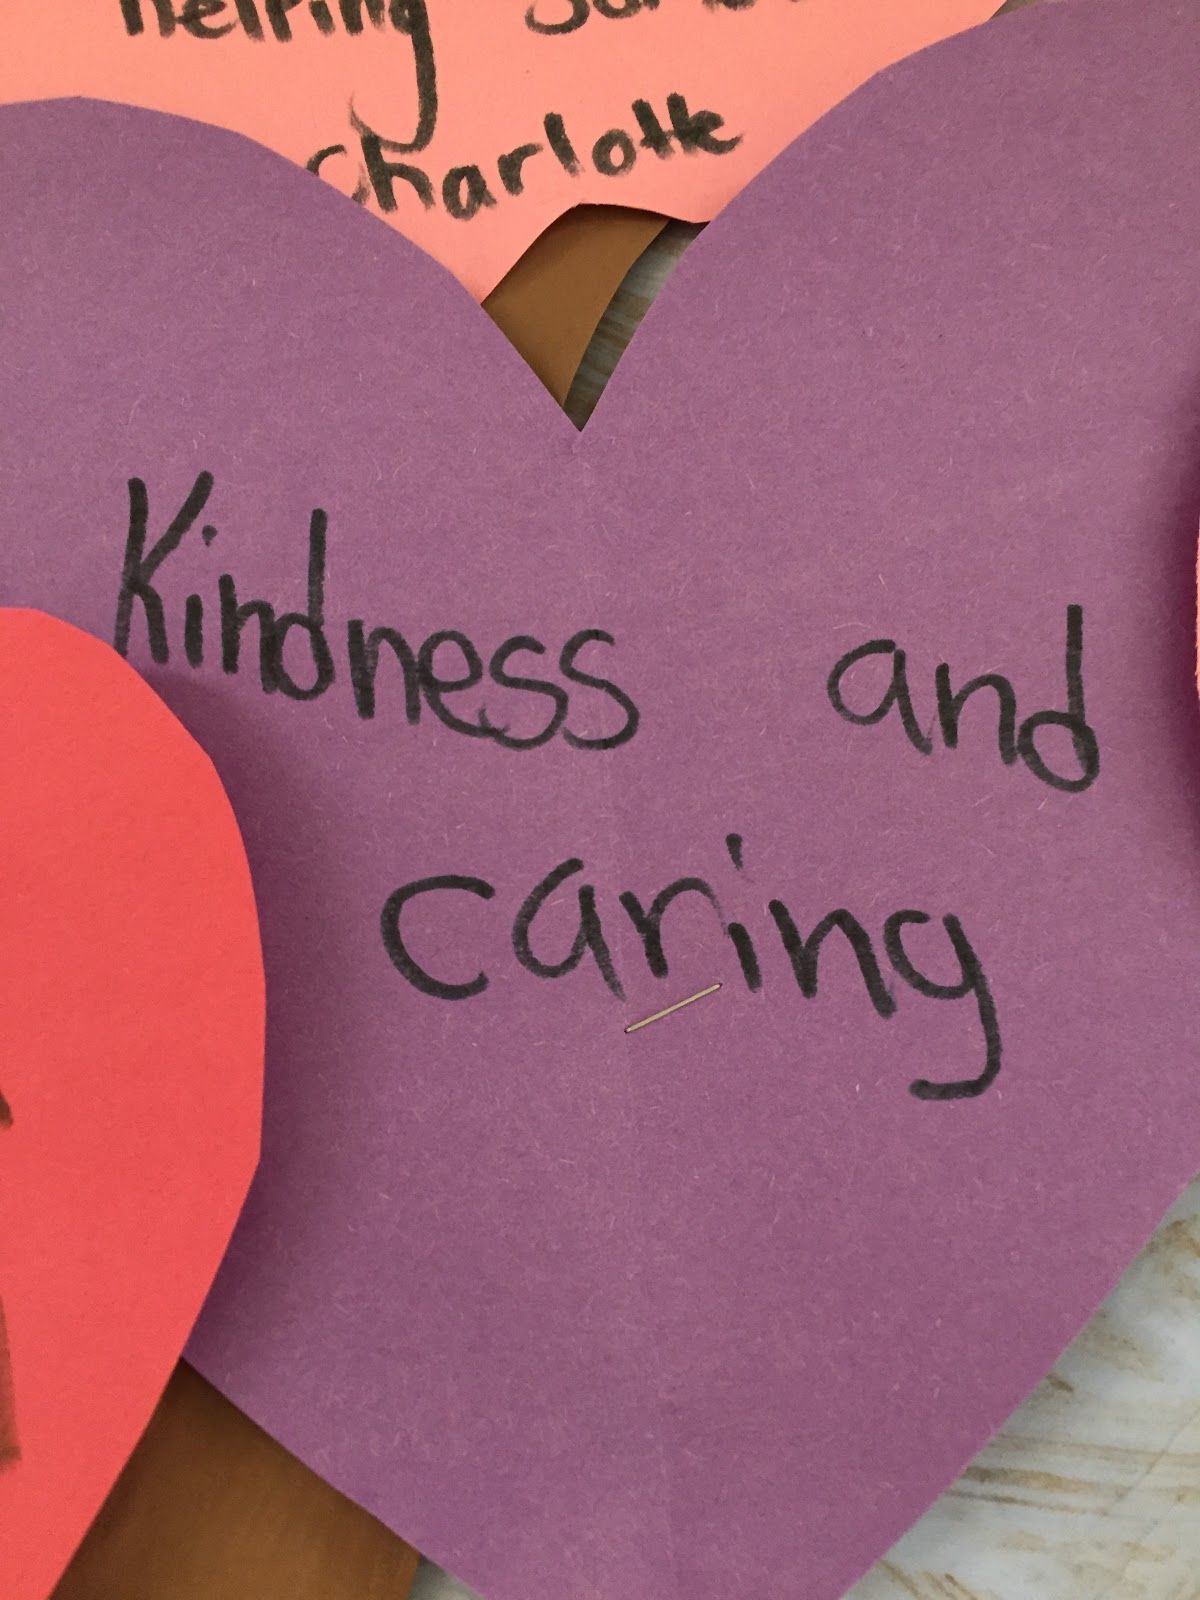 Kindergarten students at Primrose Elementary School have been busy spreading the love through a project at the school.